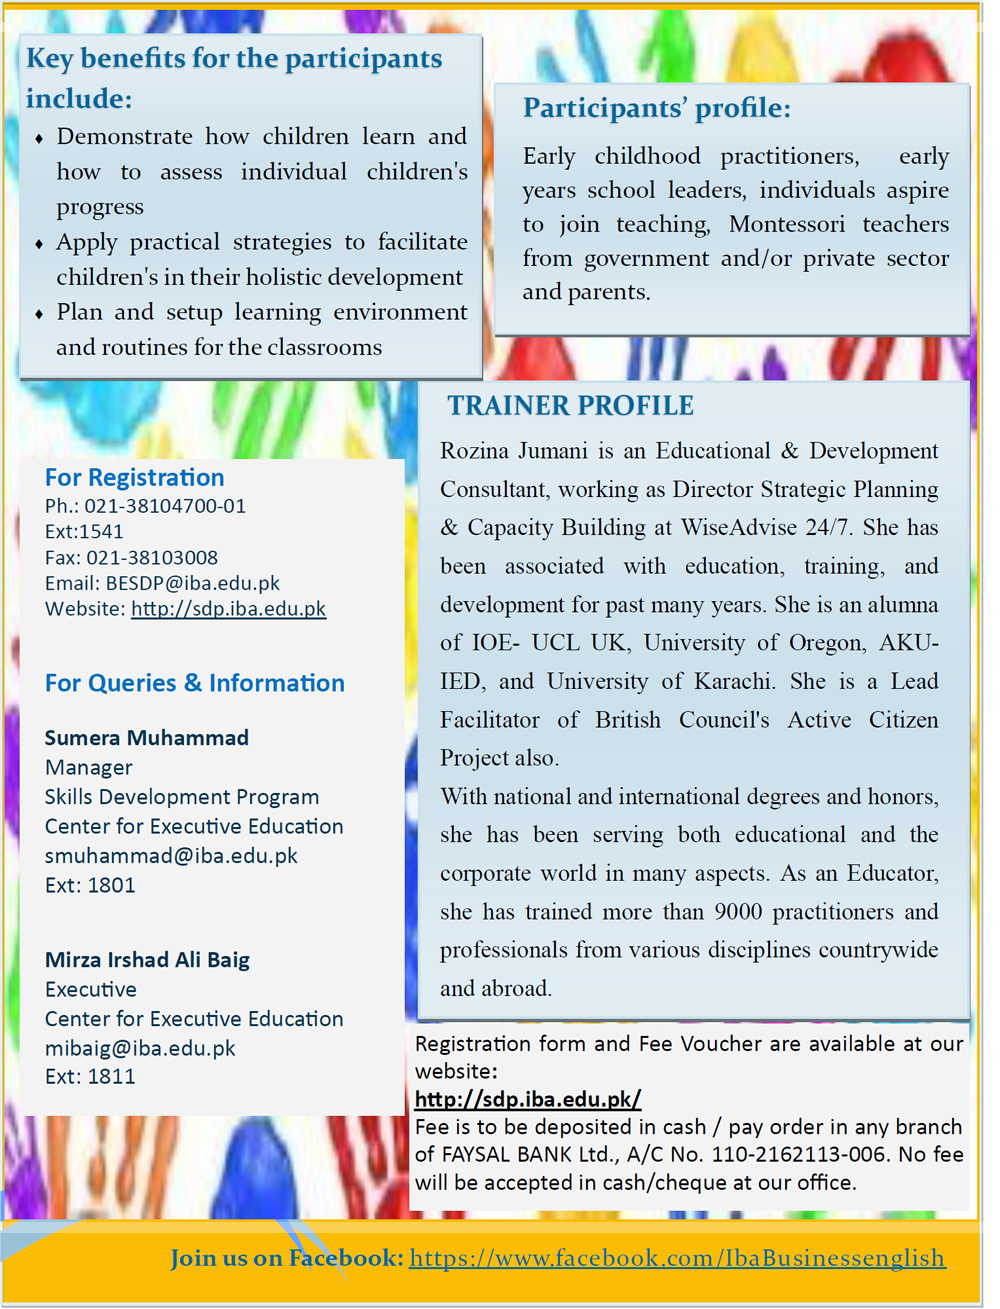 Certificate in Early Childhood Care & Education